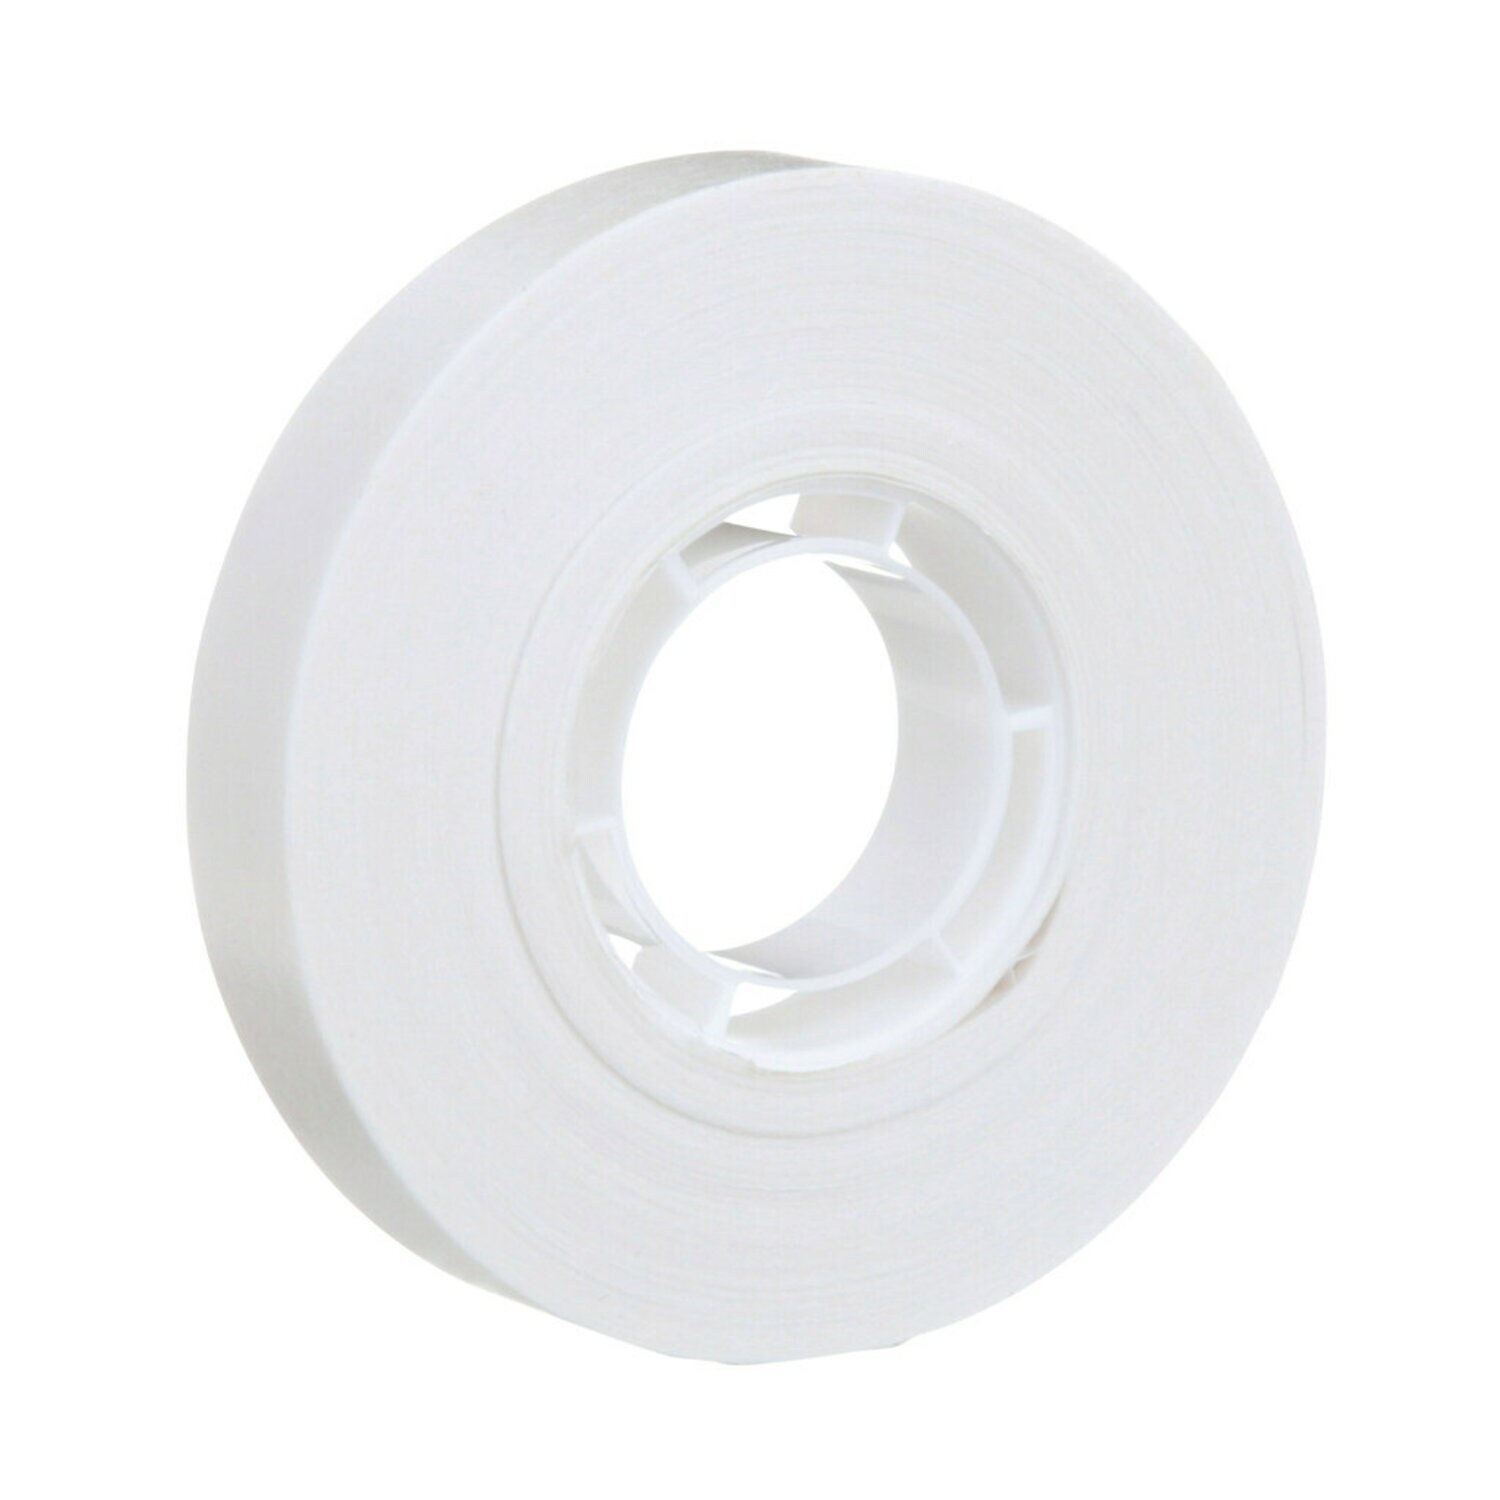 7000028874 - Scotch ATG Repositionable Double Coated Tissue Tape 928, Translucent
White, 1/2 in x 18 yd, 2 mil, 12 rolls/inner, 6 inners/case